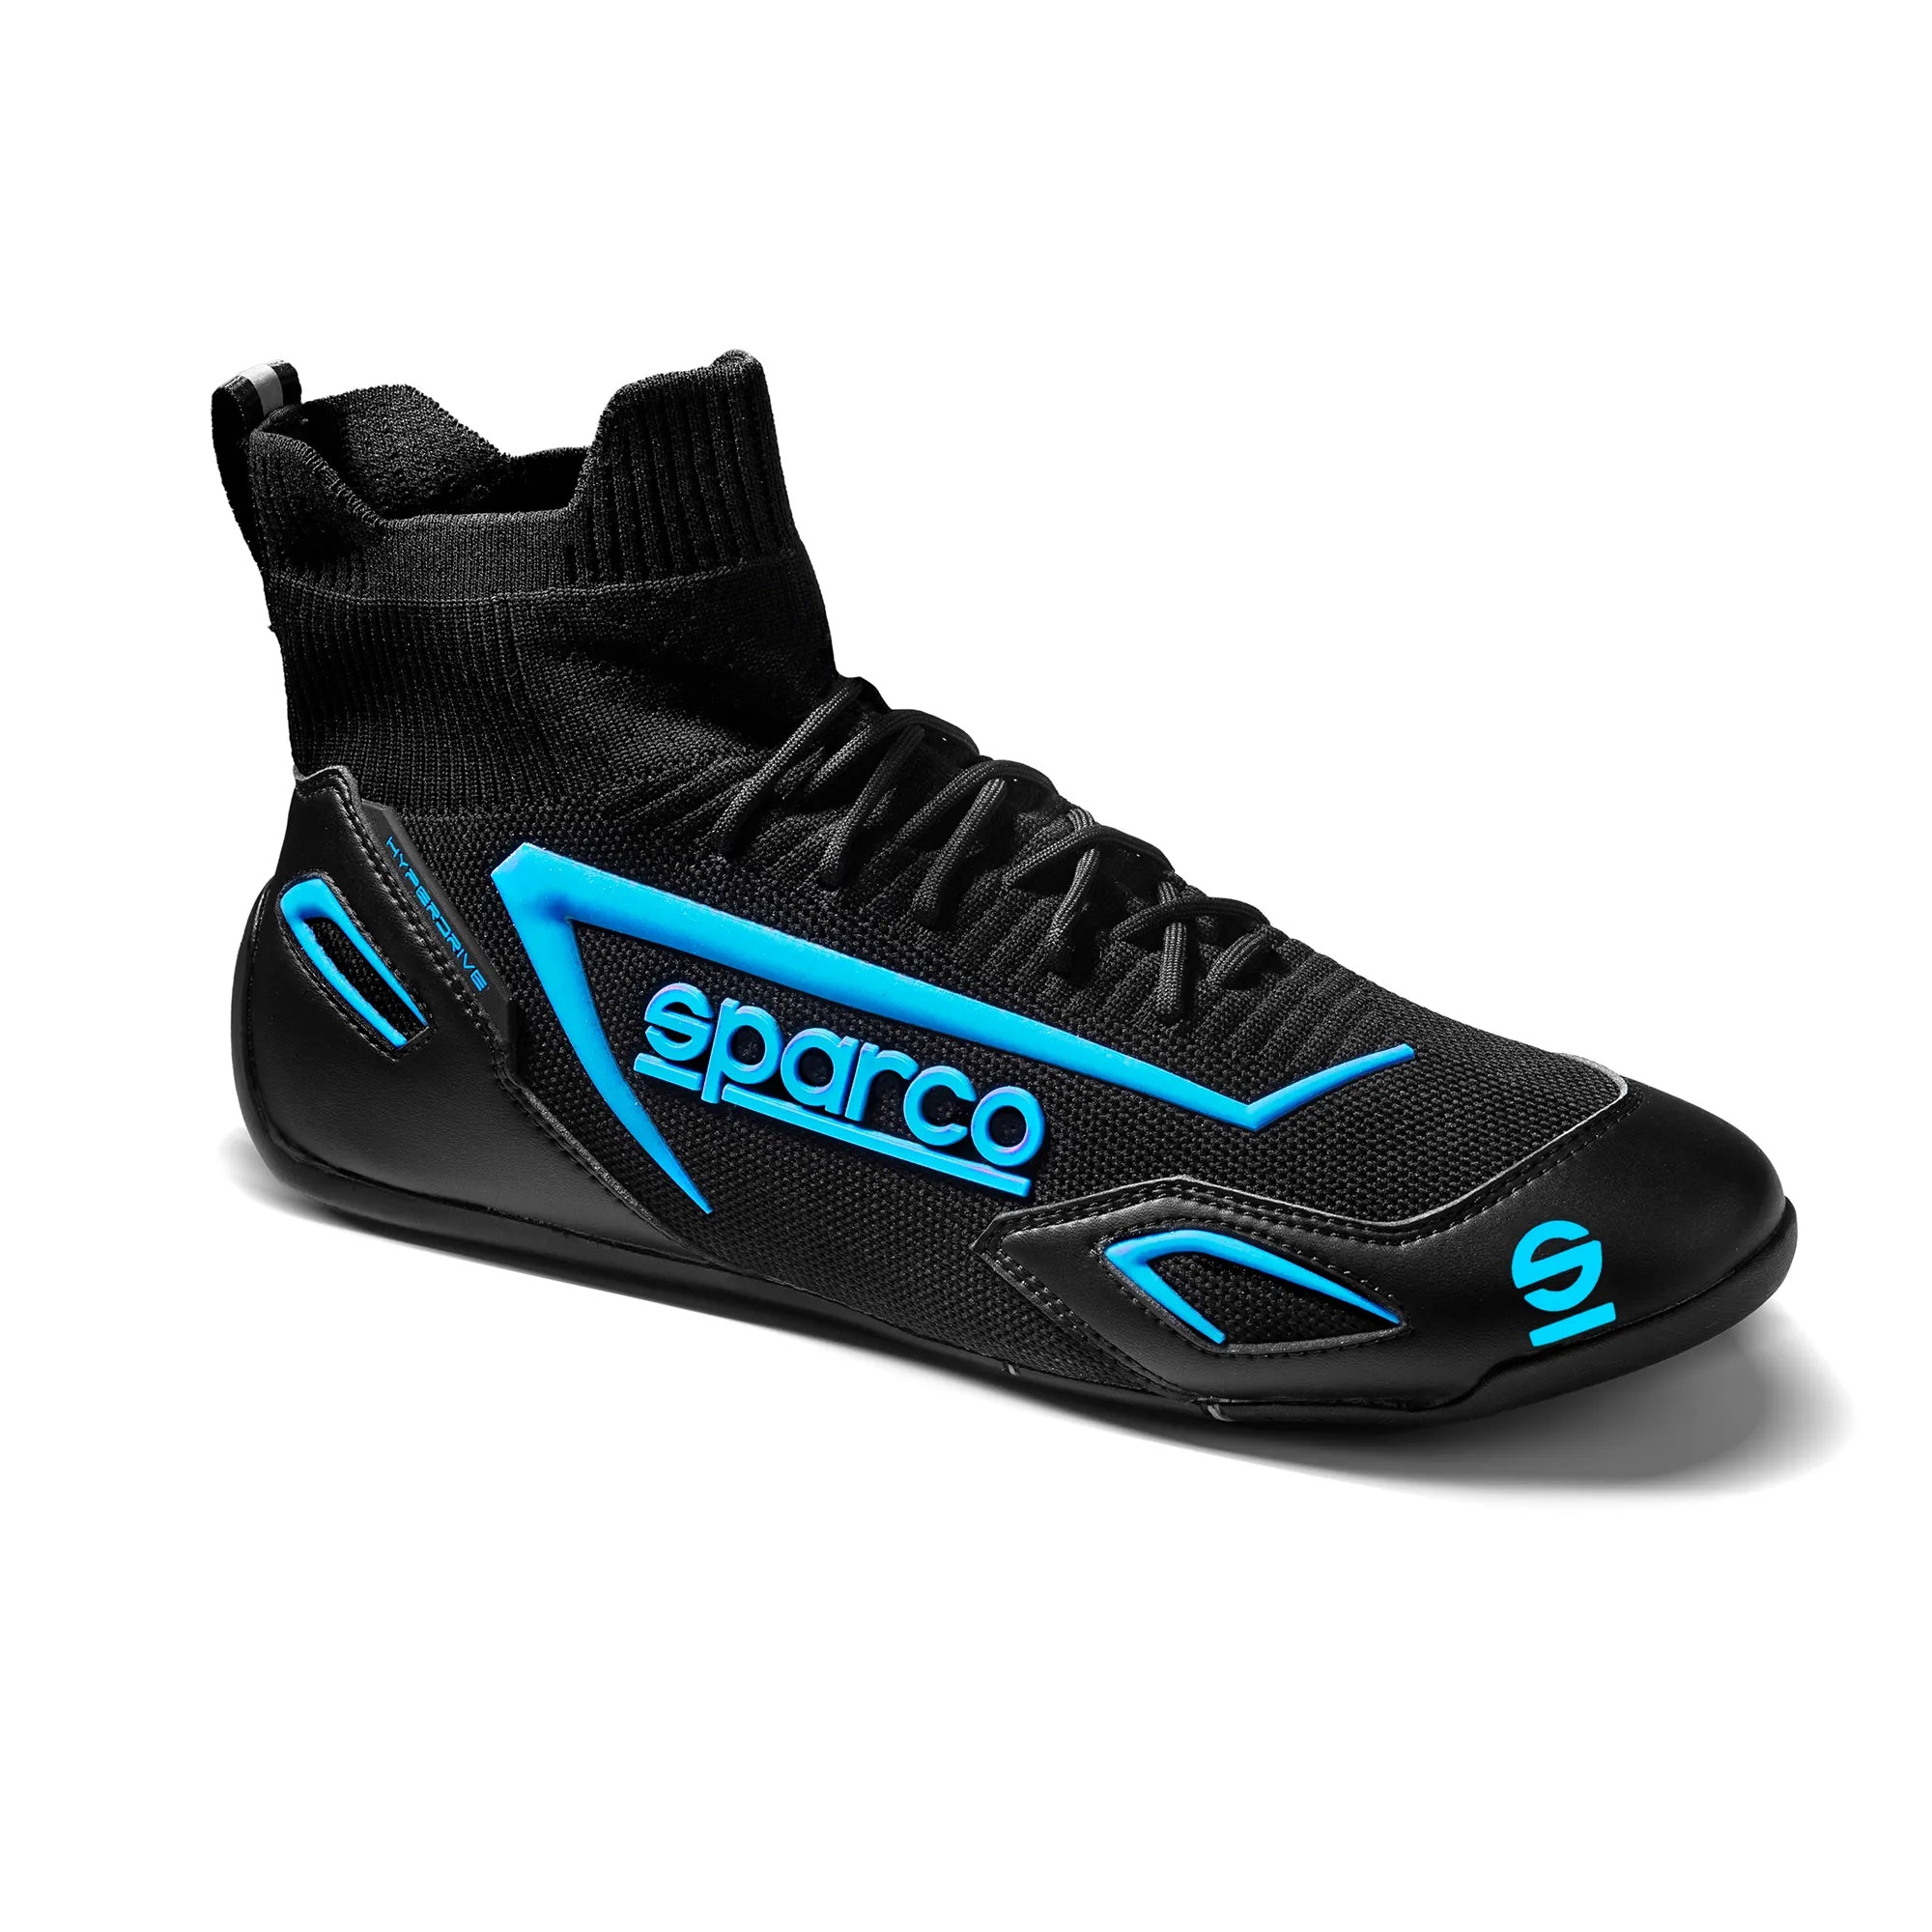 SPARCO 00129343NRAZ Gaming sim racing shoes HYPERDRIVE, black/blue, size 43 Photo-1 